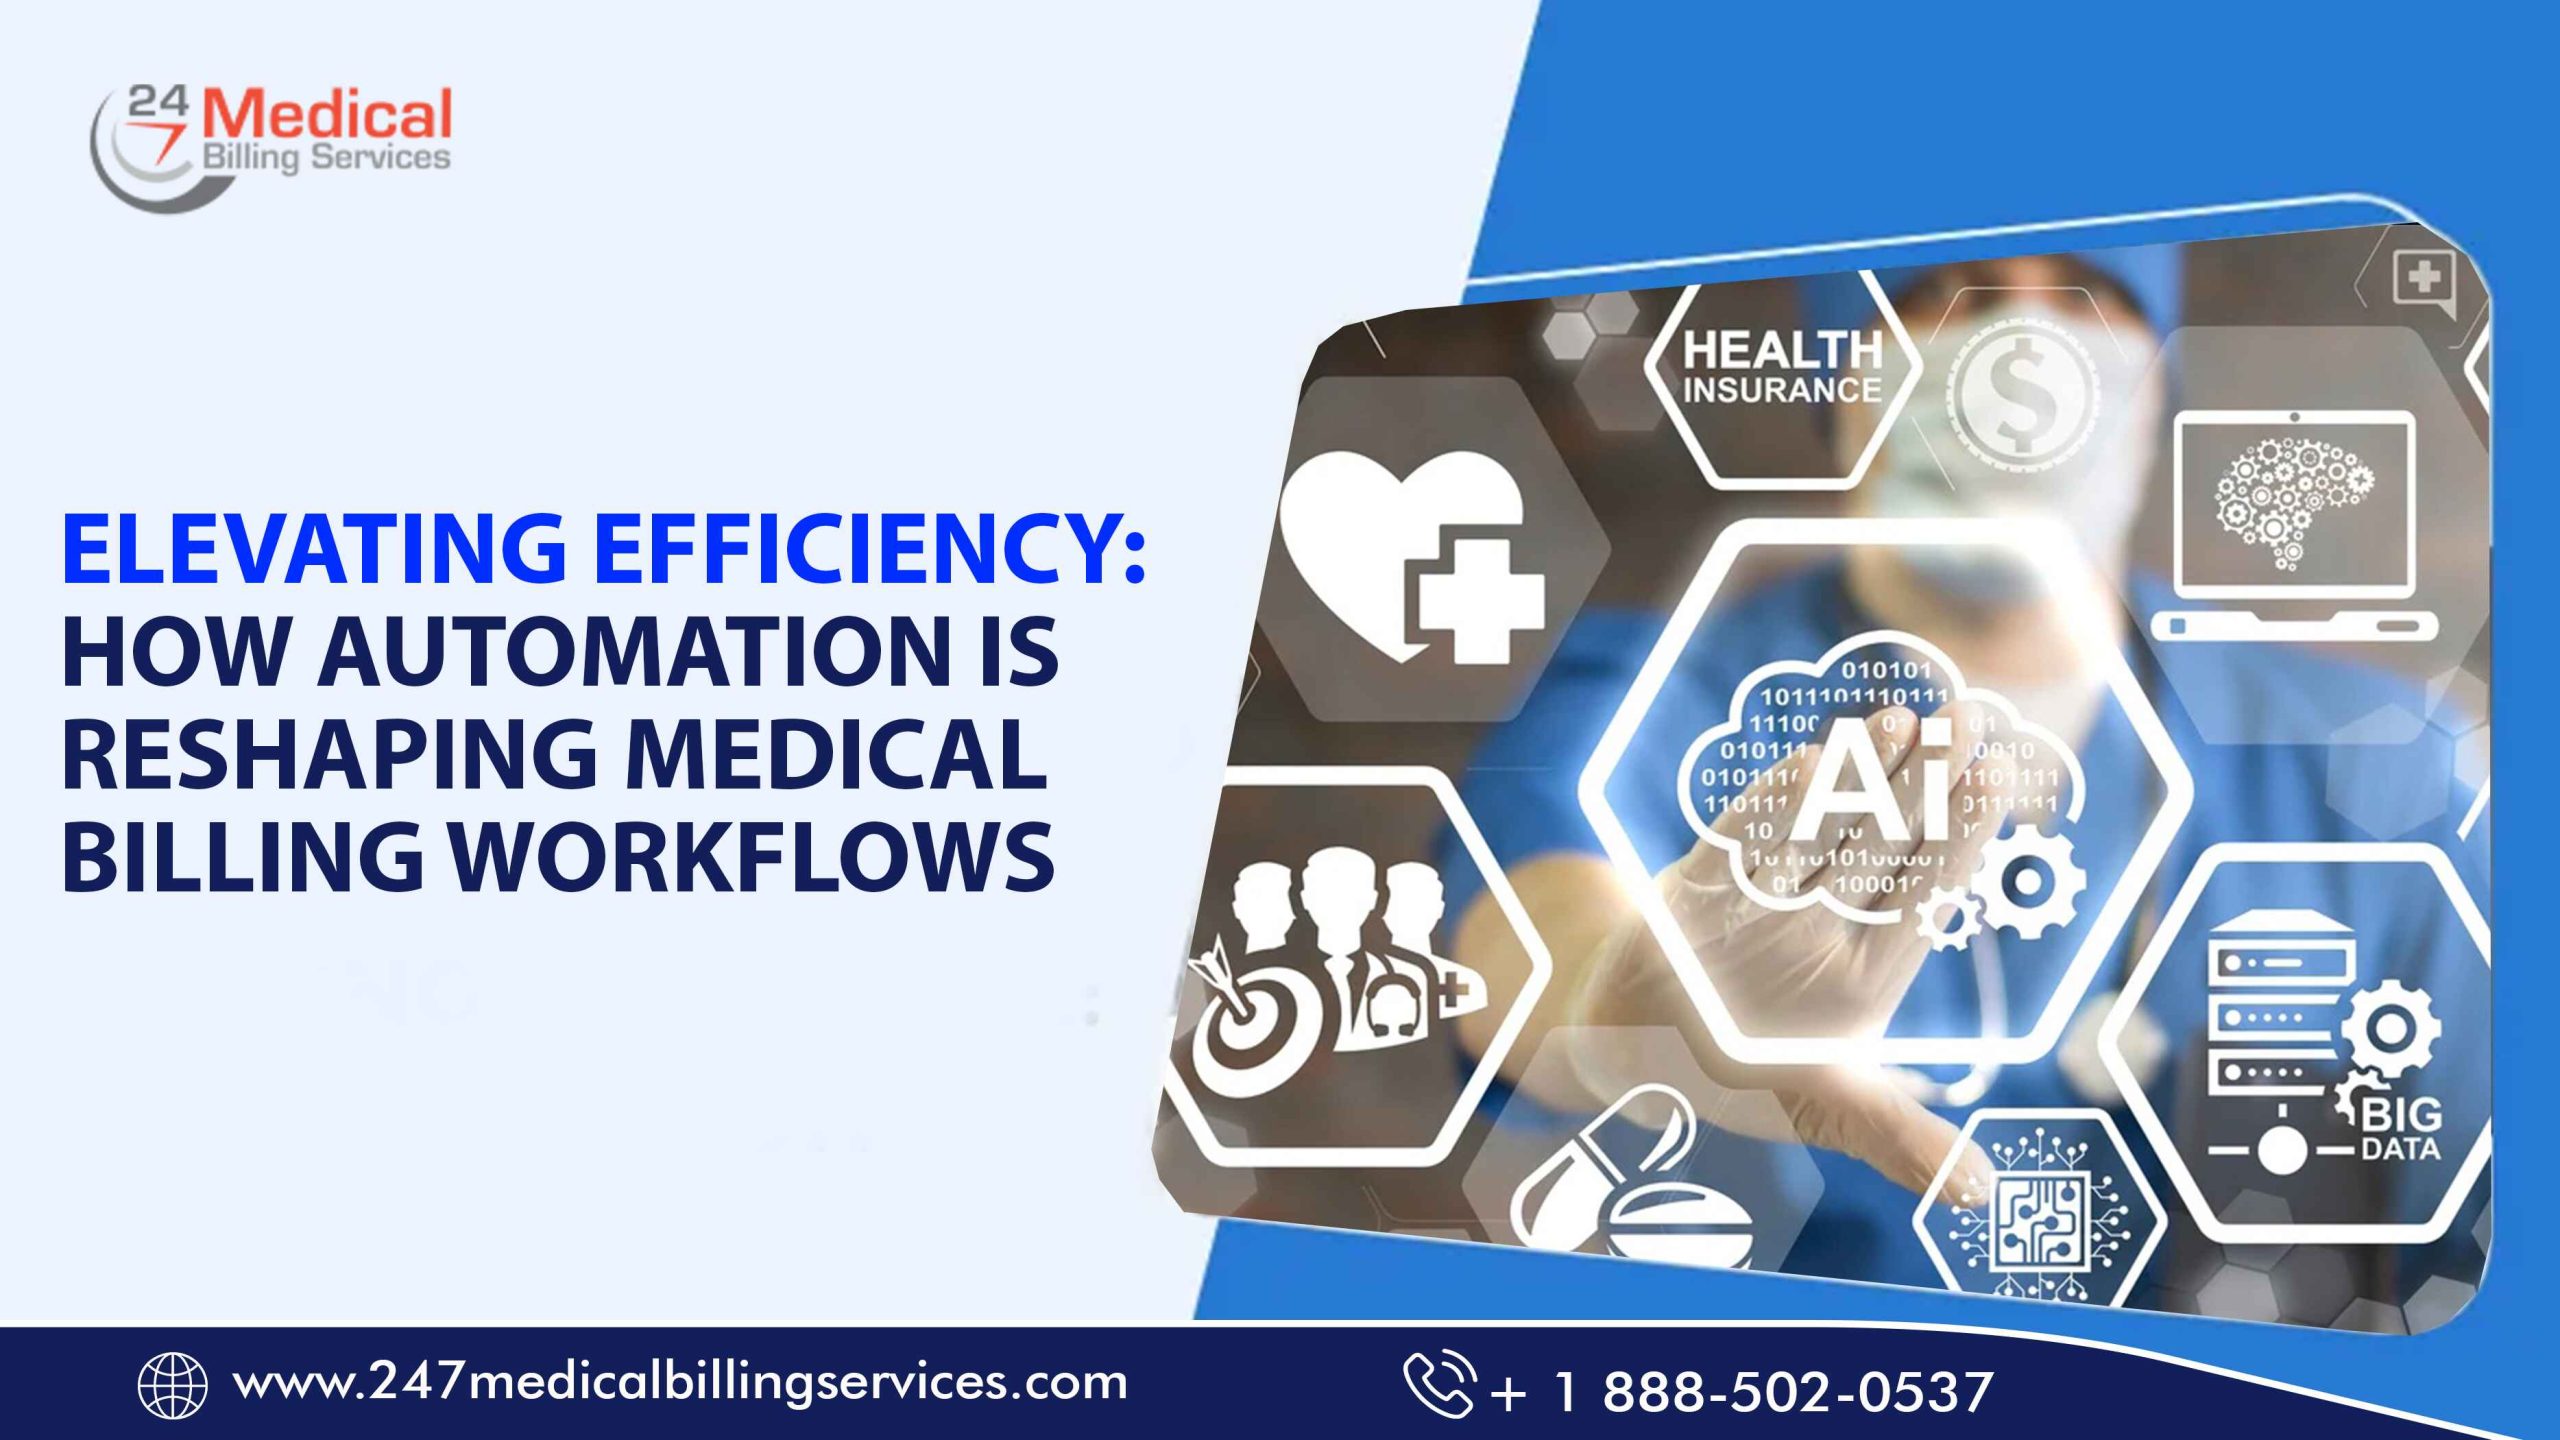  Elevating Efficiency: How Automation is Reshaping Medical Billing Workflows